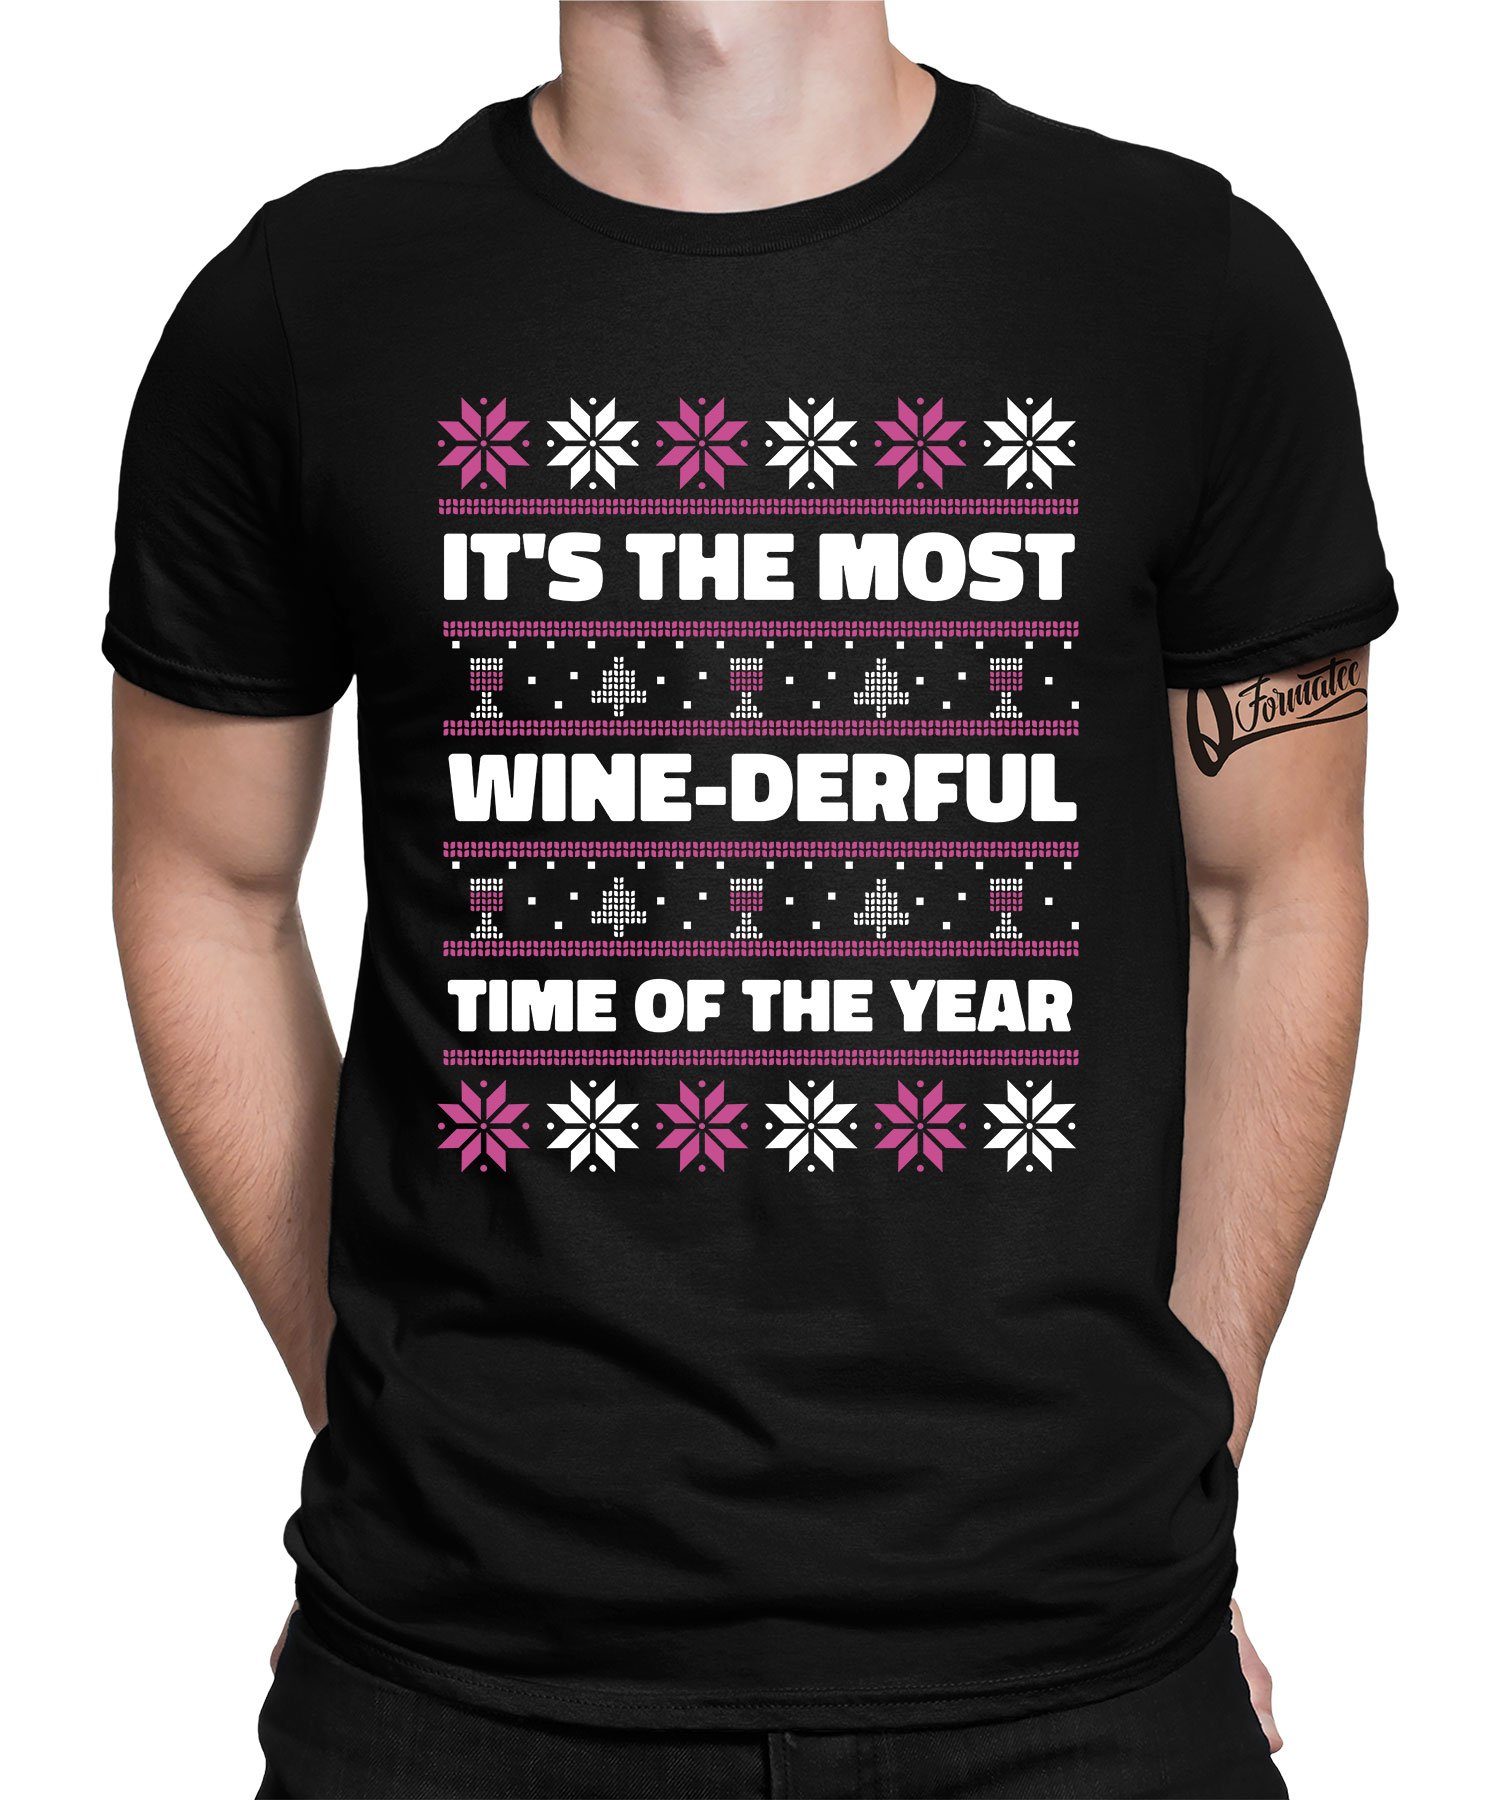 the wine-derful Quattro time of Weinlie Formatee Kurzarmshirt most It's the year (1-tlg)